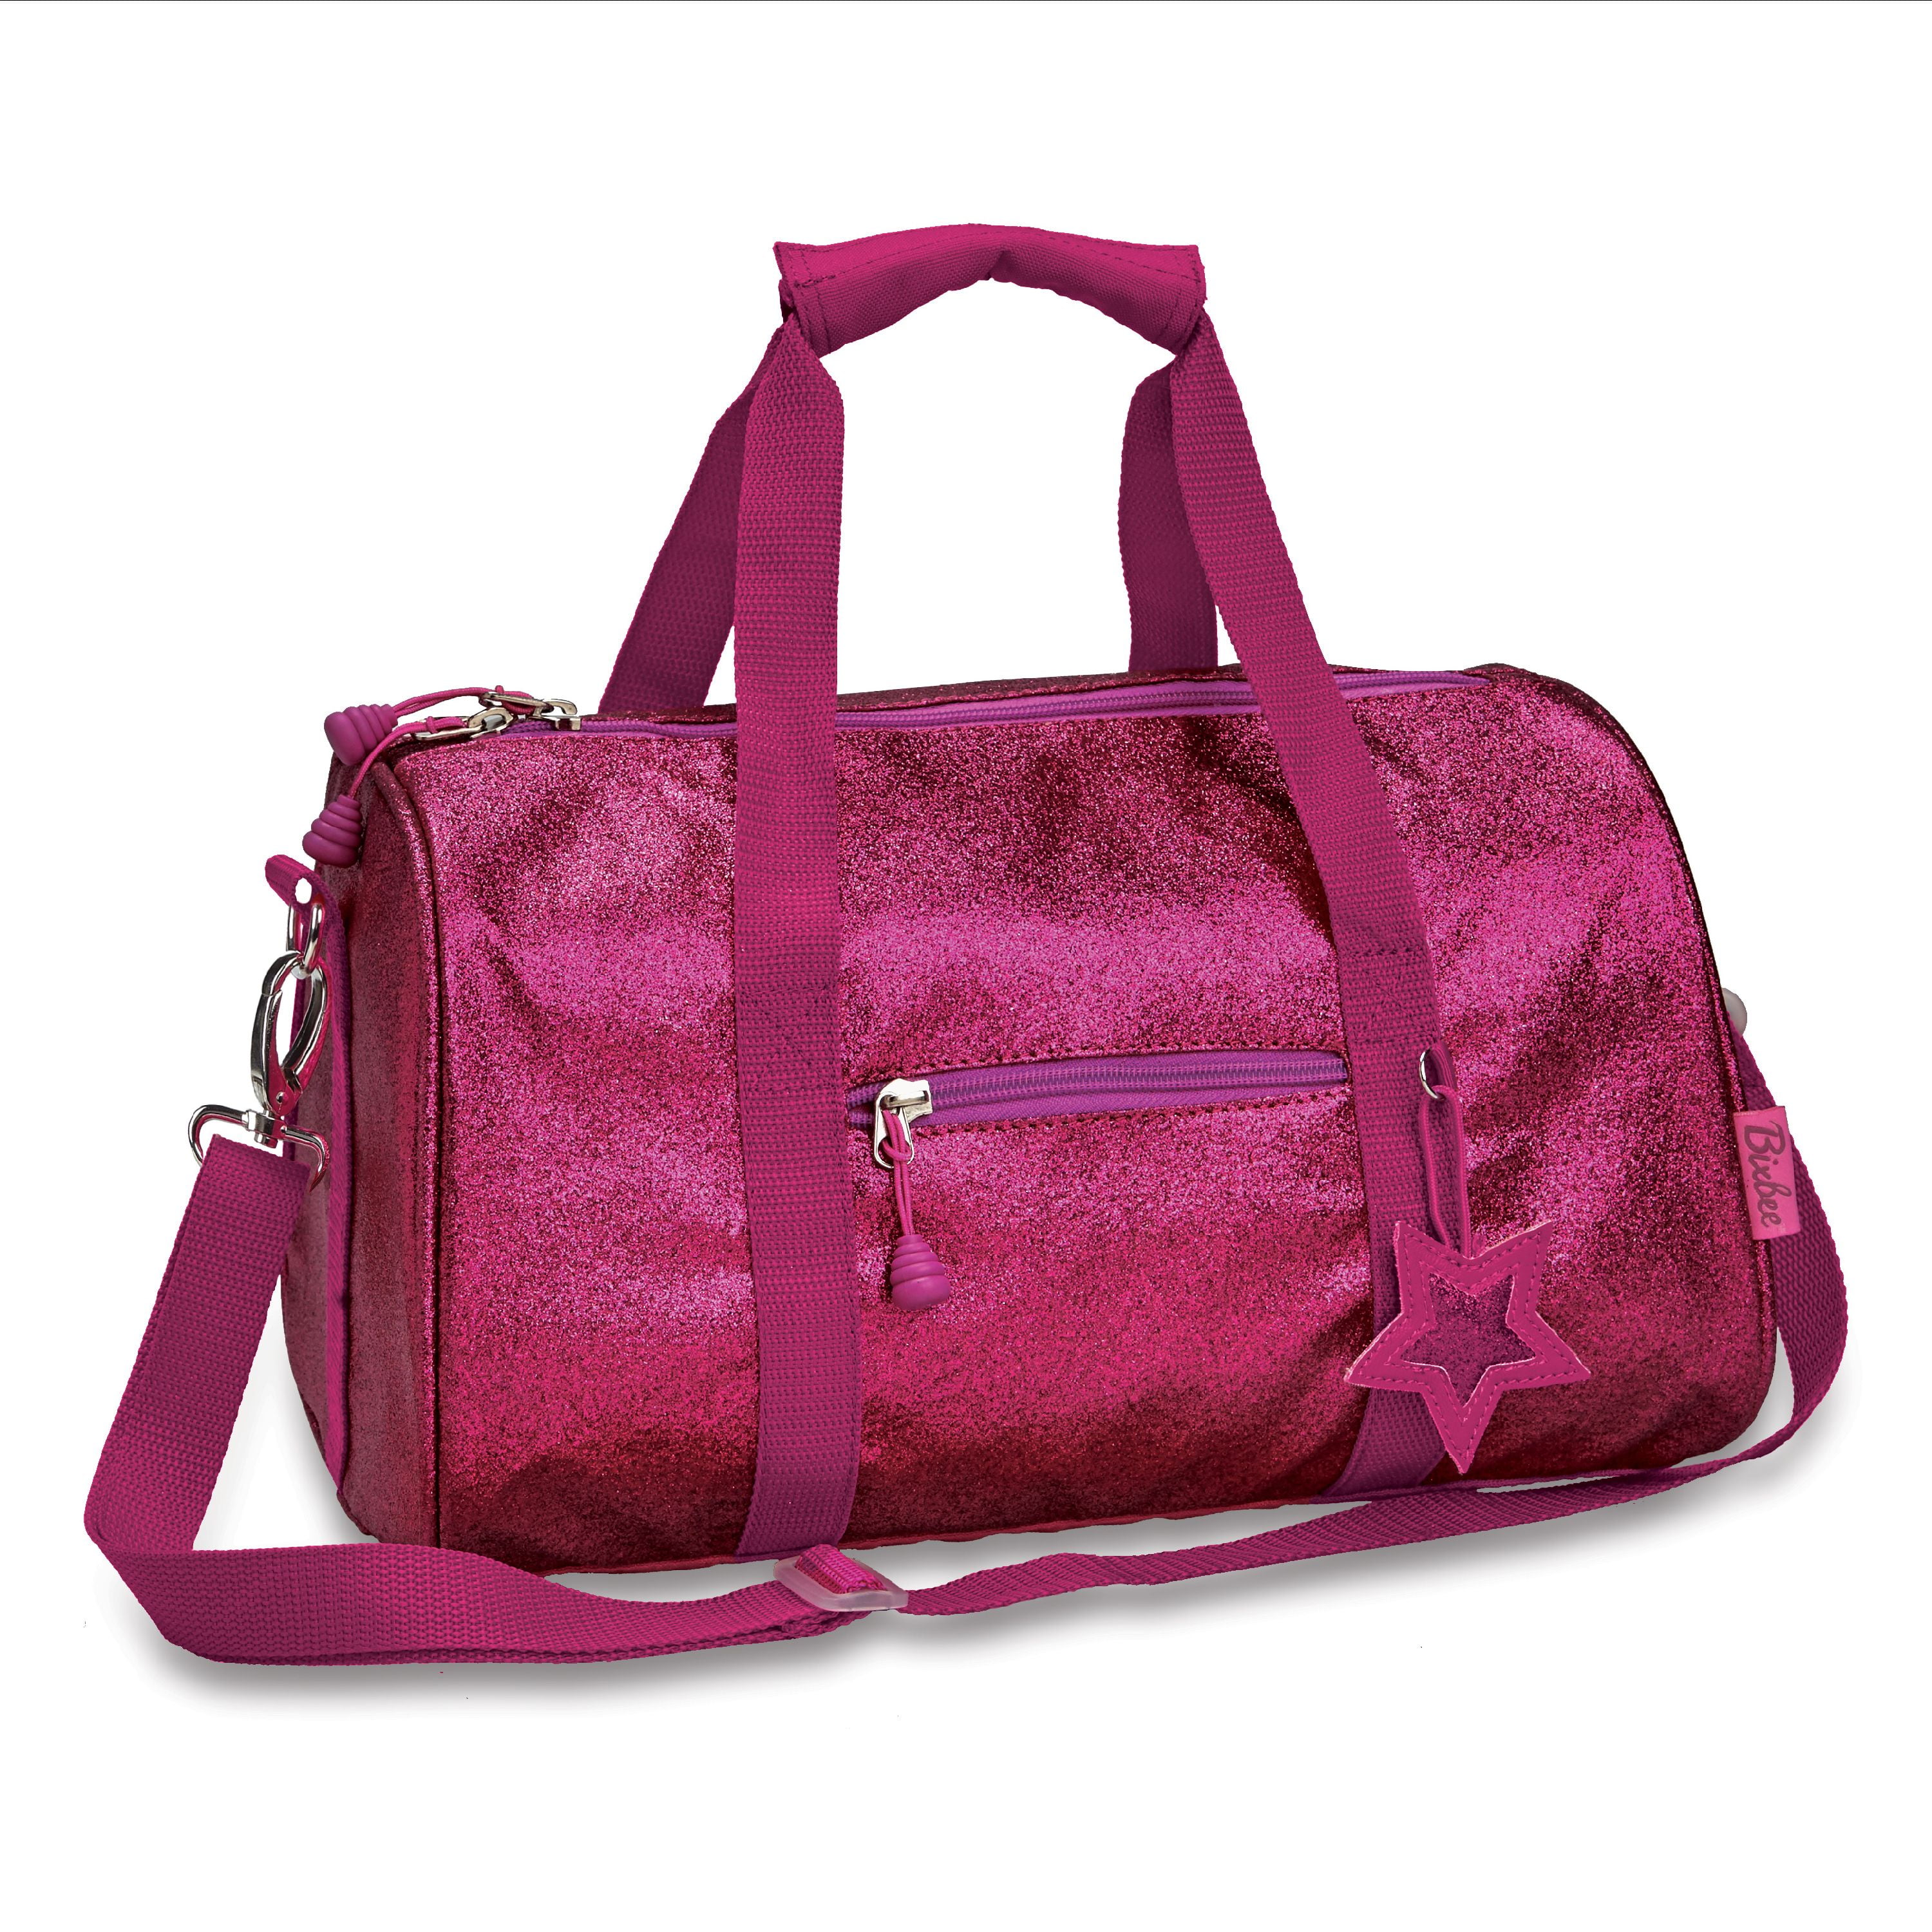 Bixbee Kids Duffel Bag for Dance, School and Sports, Small, Medium and Large, Sparkalicious Pink ...